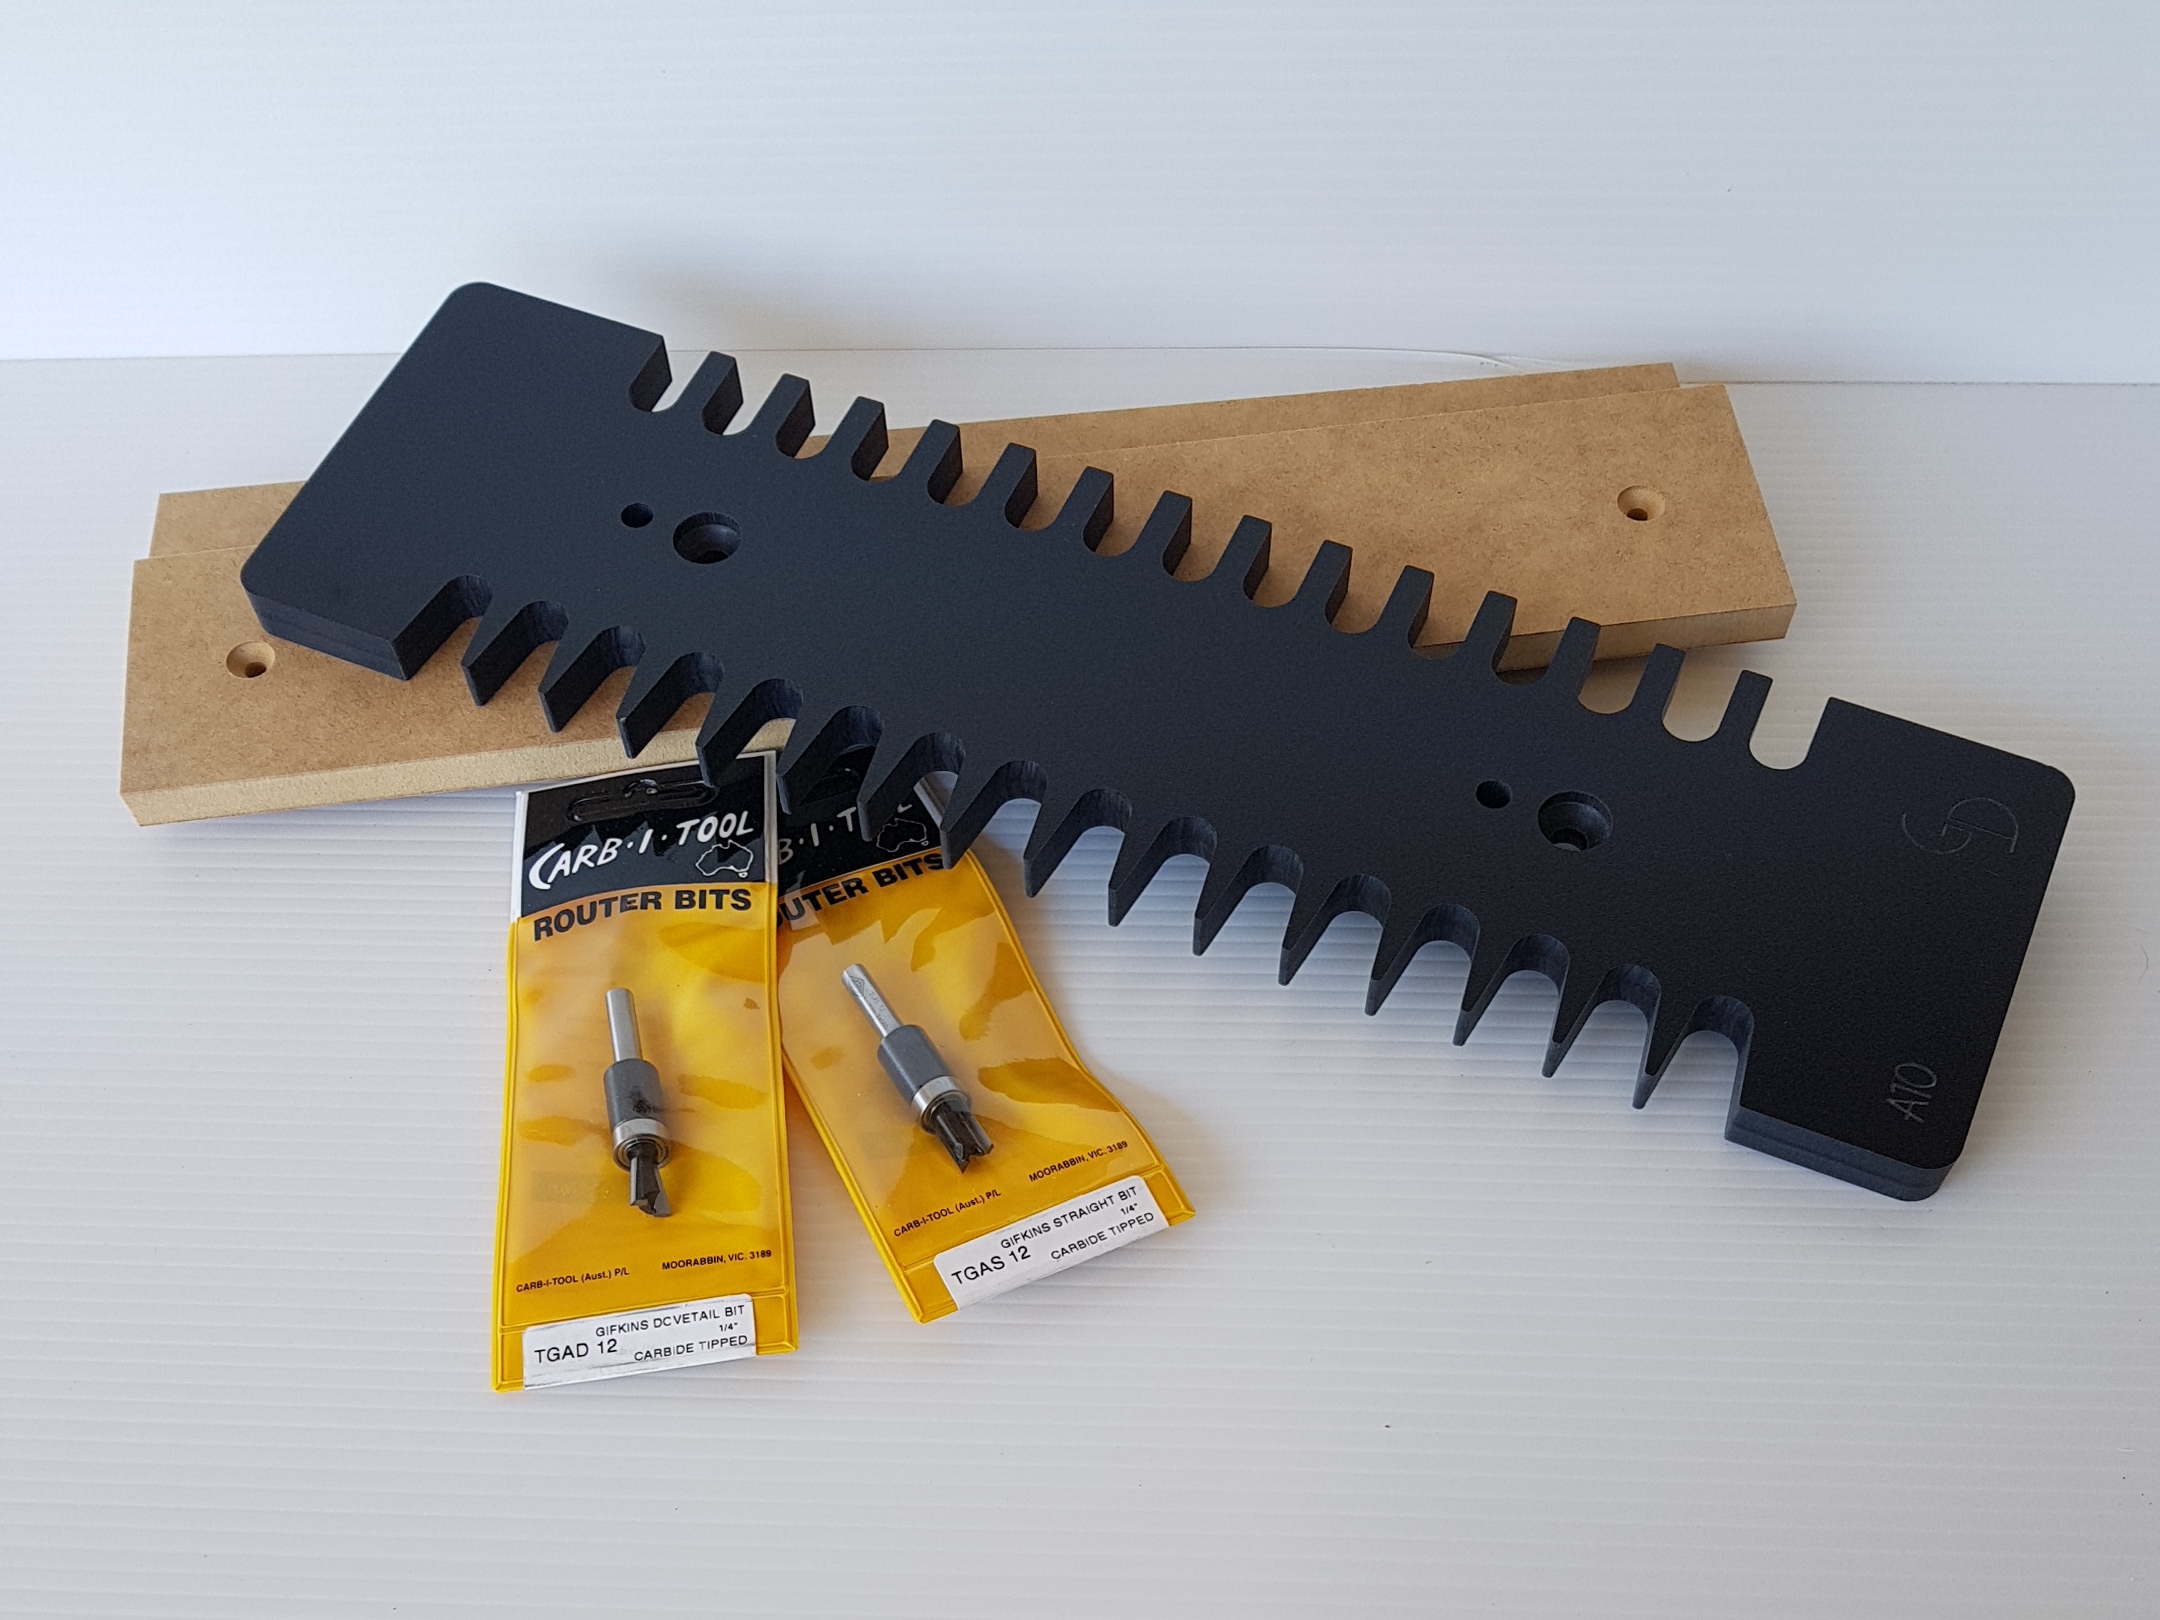 Dovetail joint & finger jointtemplate upgrade packages for your jig.